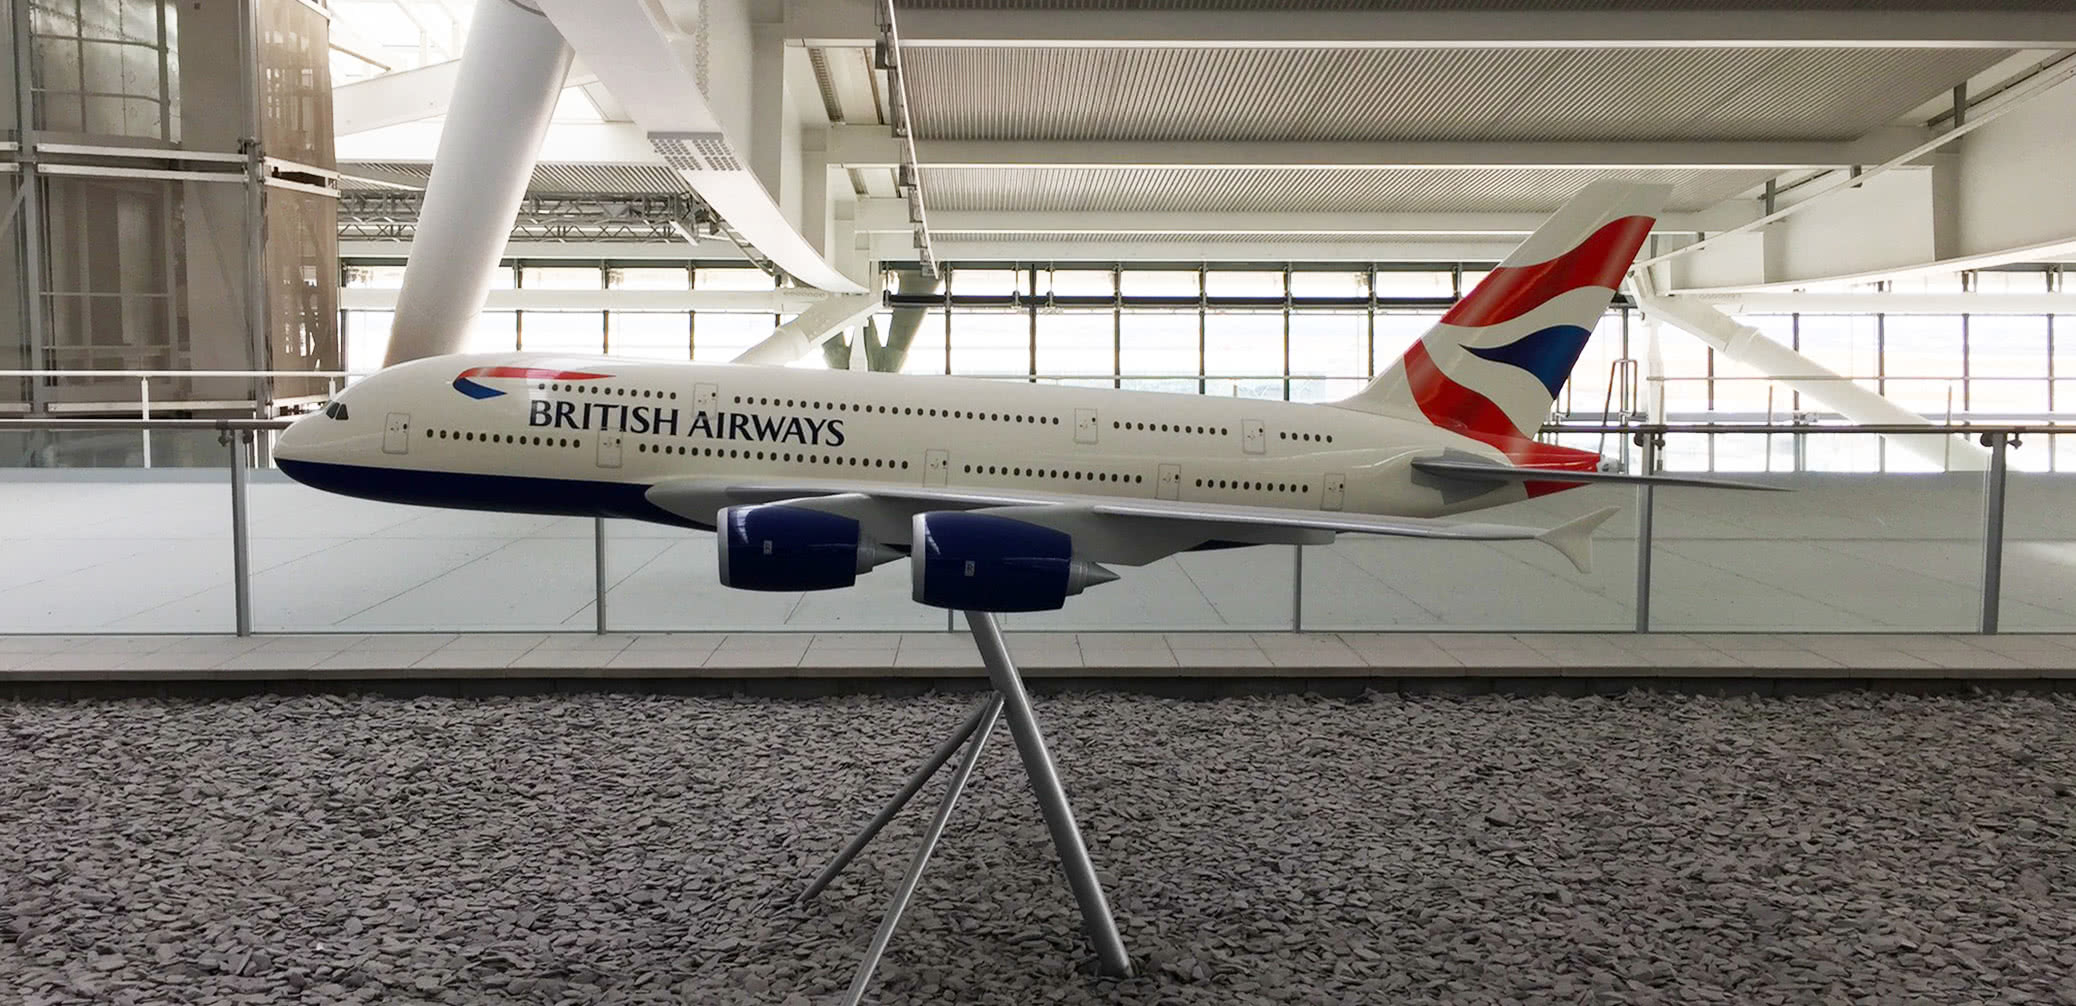 How To Access The Concorde Room At Heathrow Terminal 5